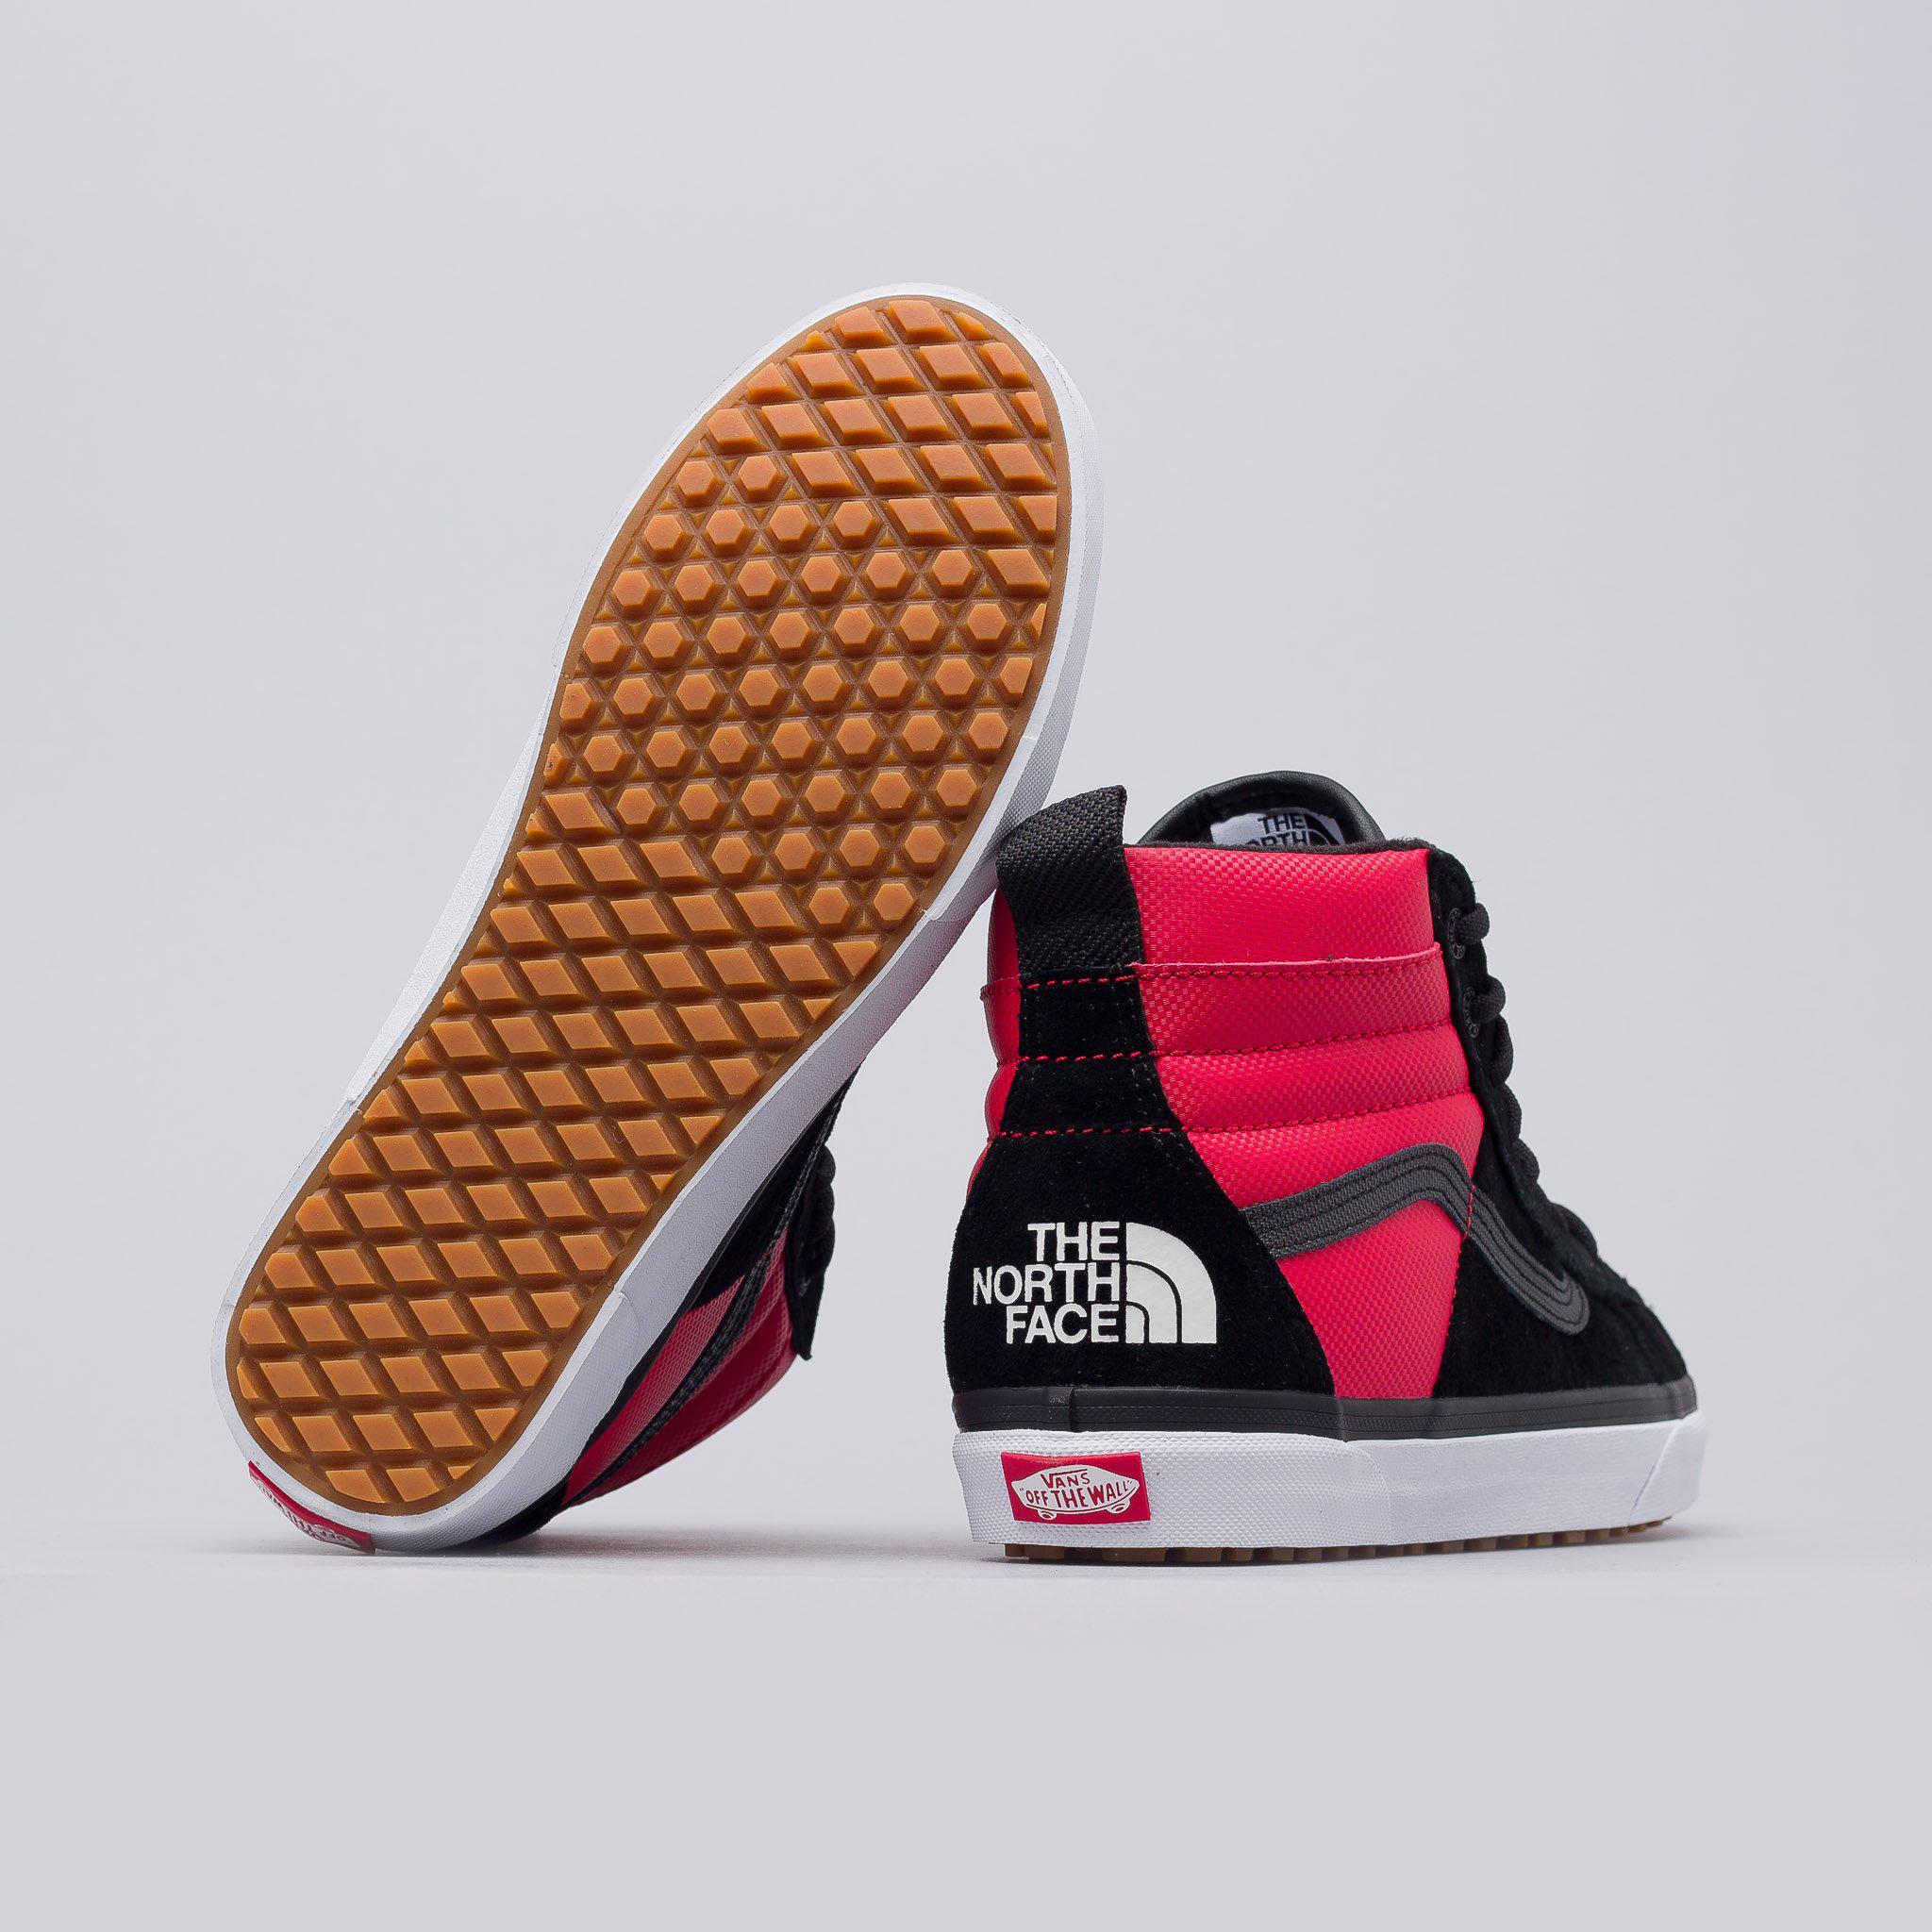 vans sk8 hi x the north face Cheaper Than Retail Price> Buy Clothing,  Accessories and lifestyle products for women & men -